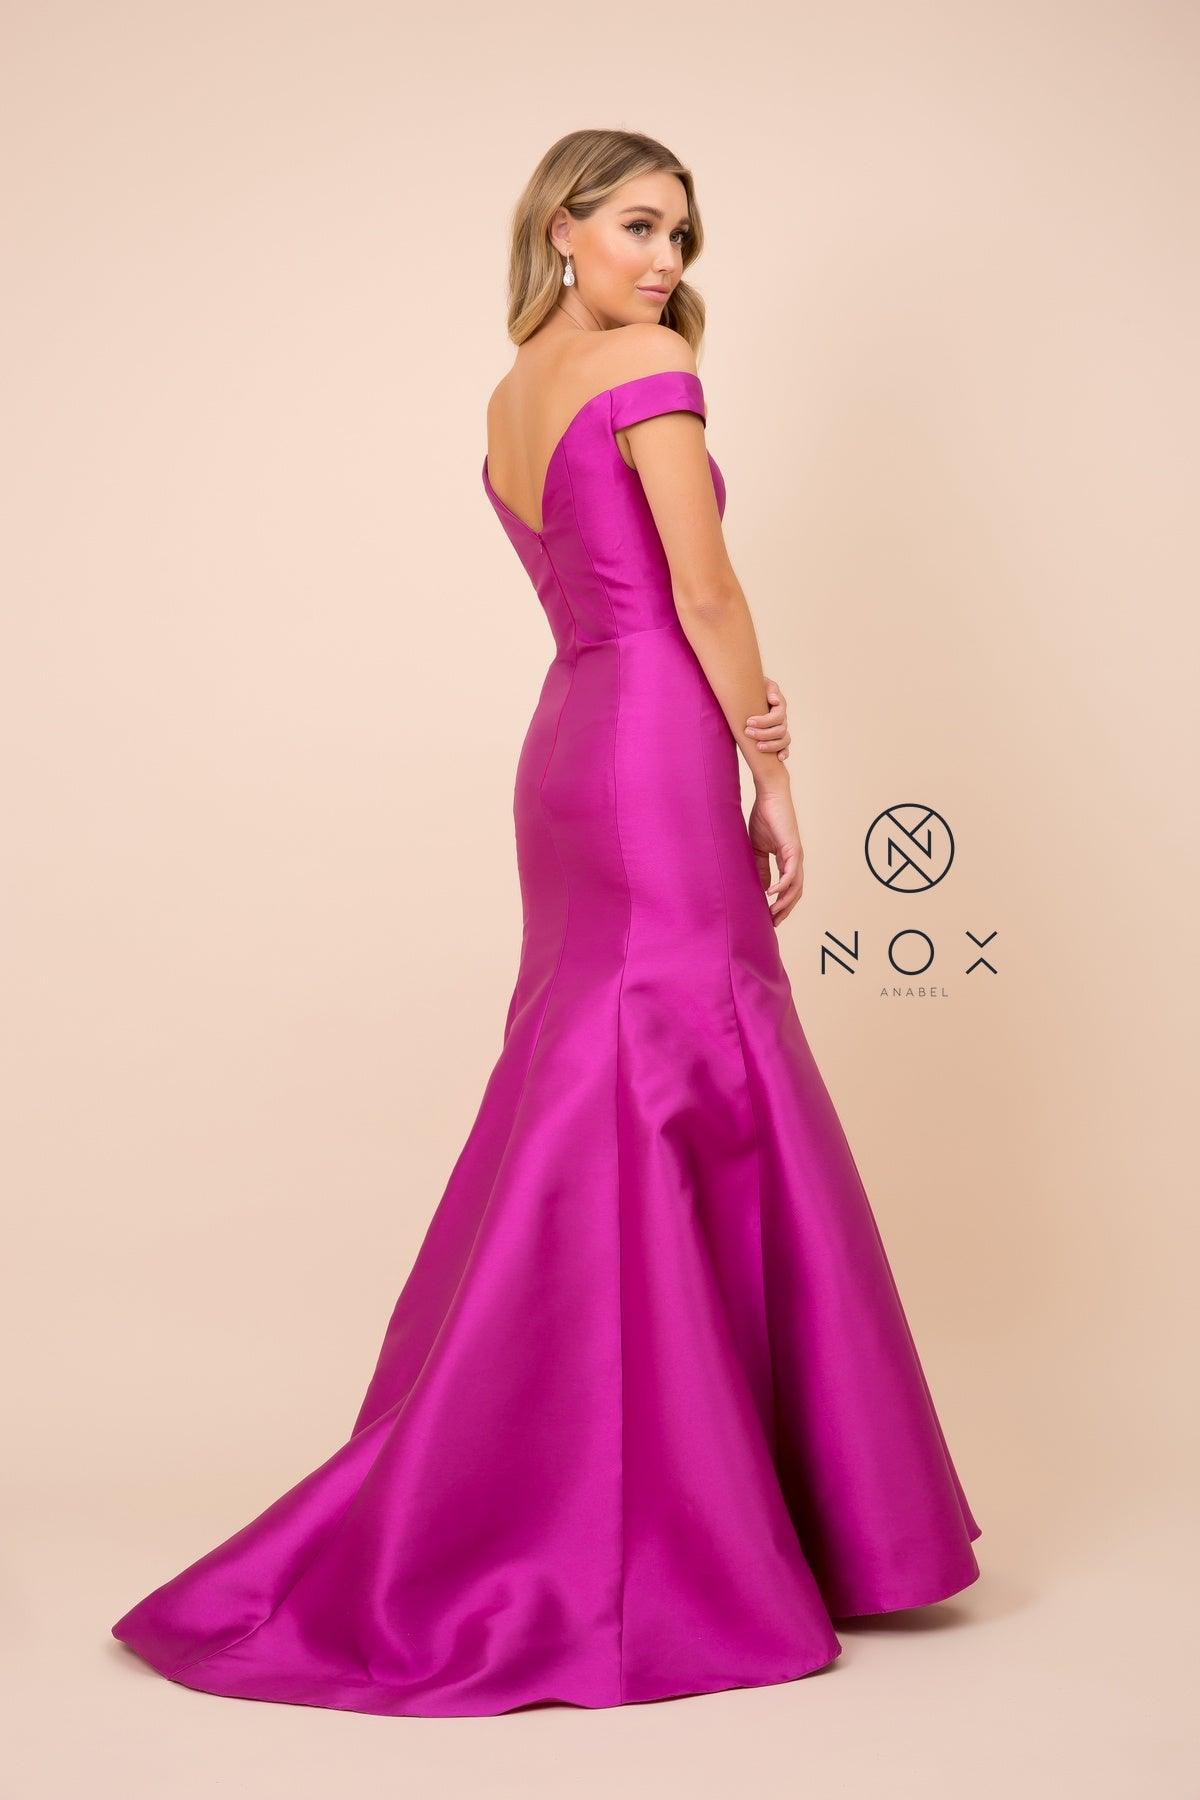 Long Off The Shoulder Fitted Formal Prom Dress Evening Gown - The Dress Outlet Nox Anabel